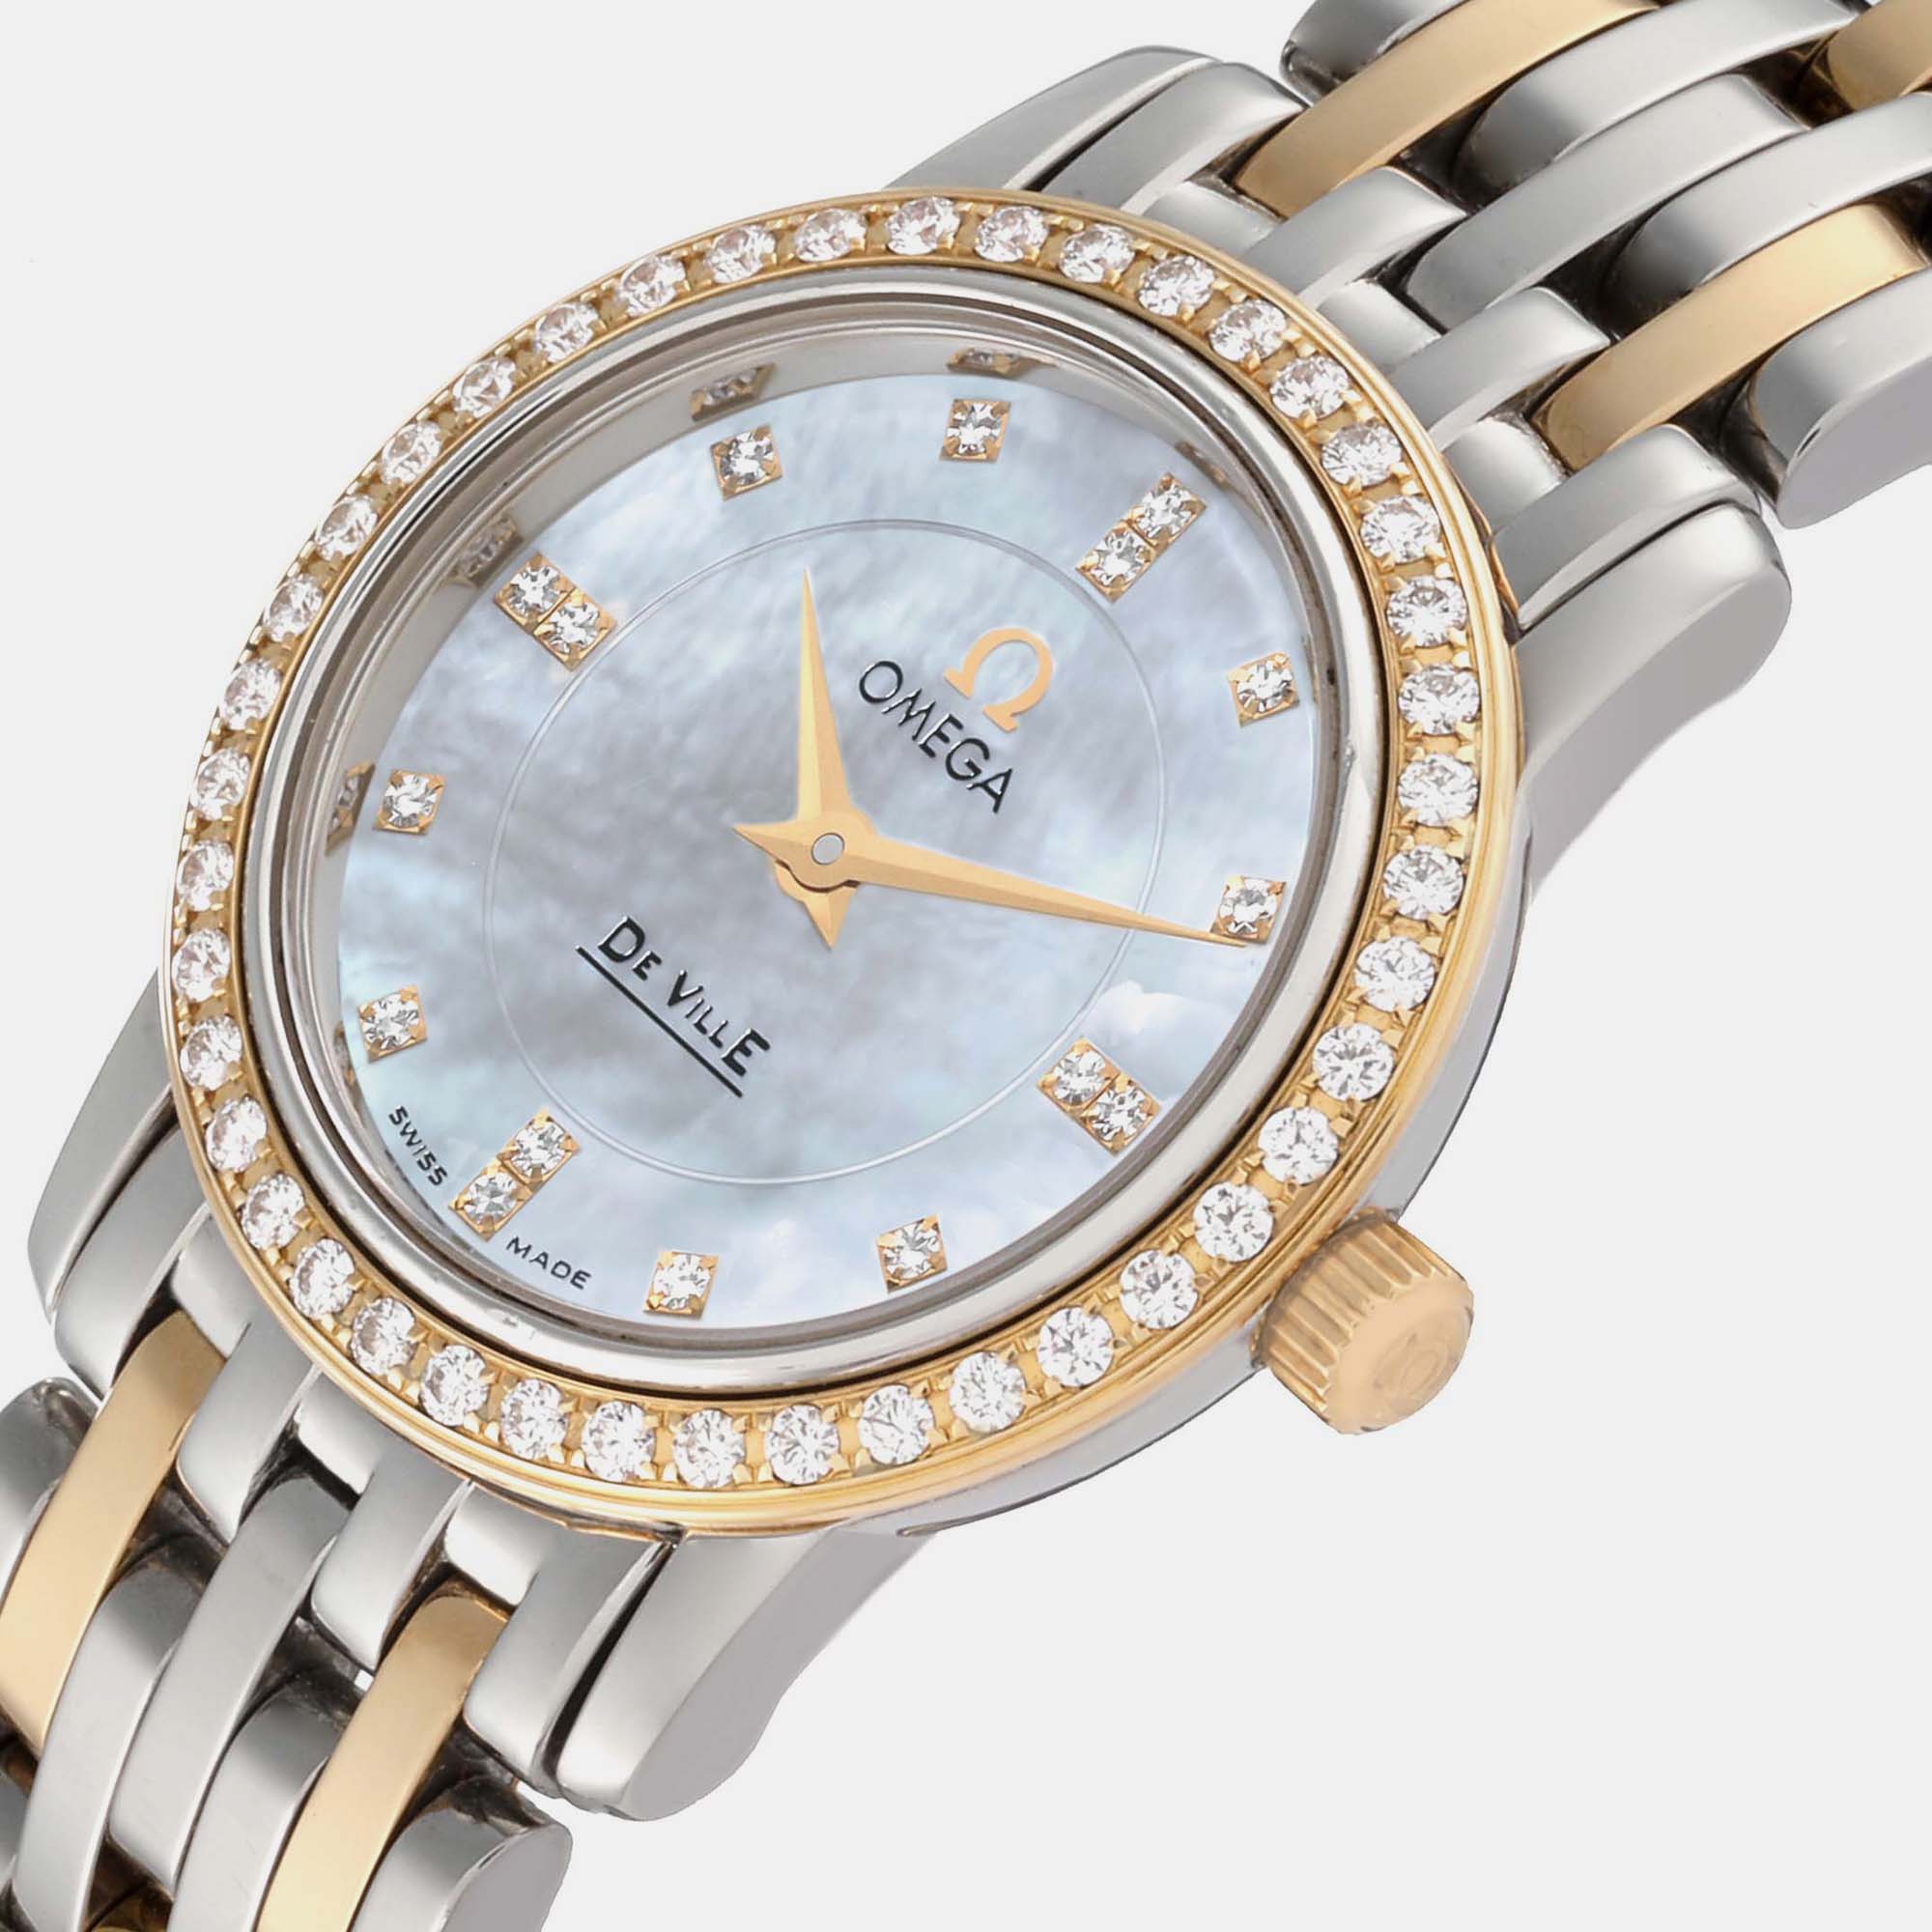 

Omega Mother Of Pearl 18k Yellow Gold And Stainless Steel De Ville Prestige 4375.75 Quartz Women's Wristwatch 22 mm, Silver